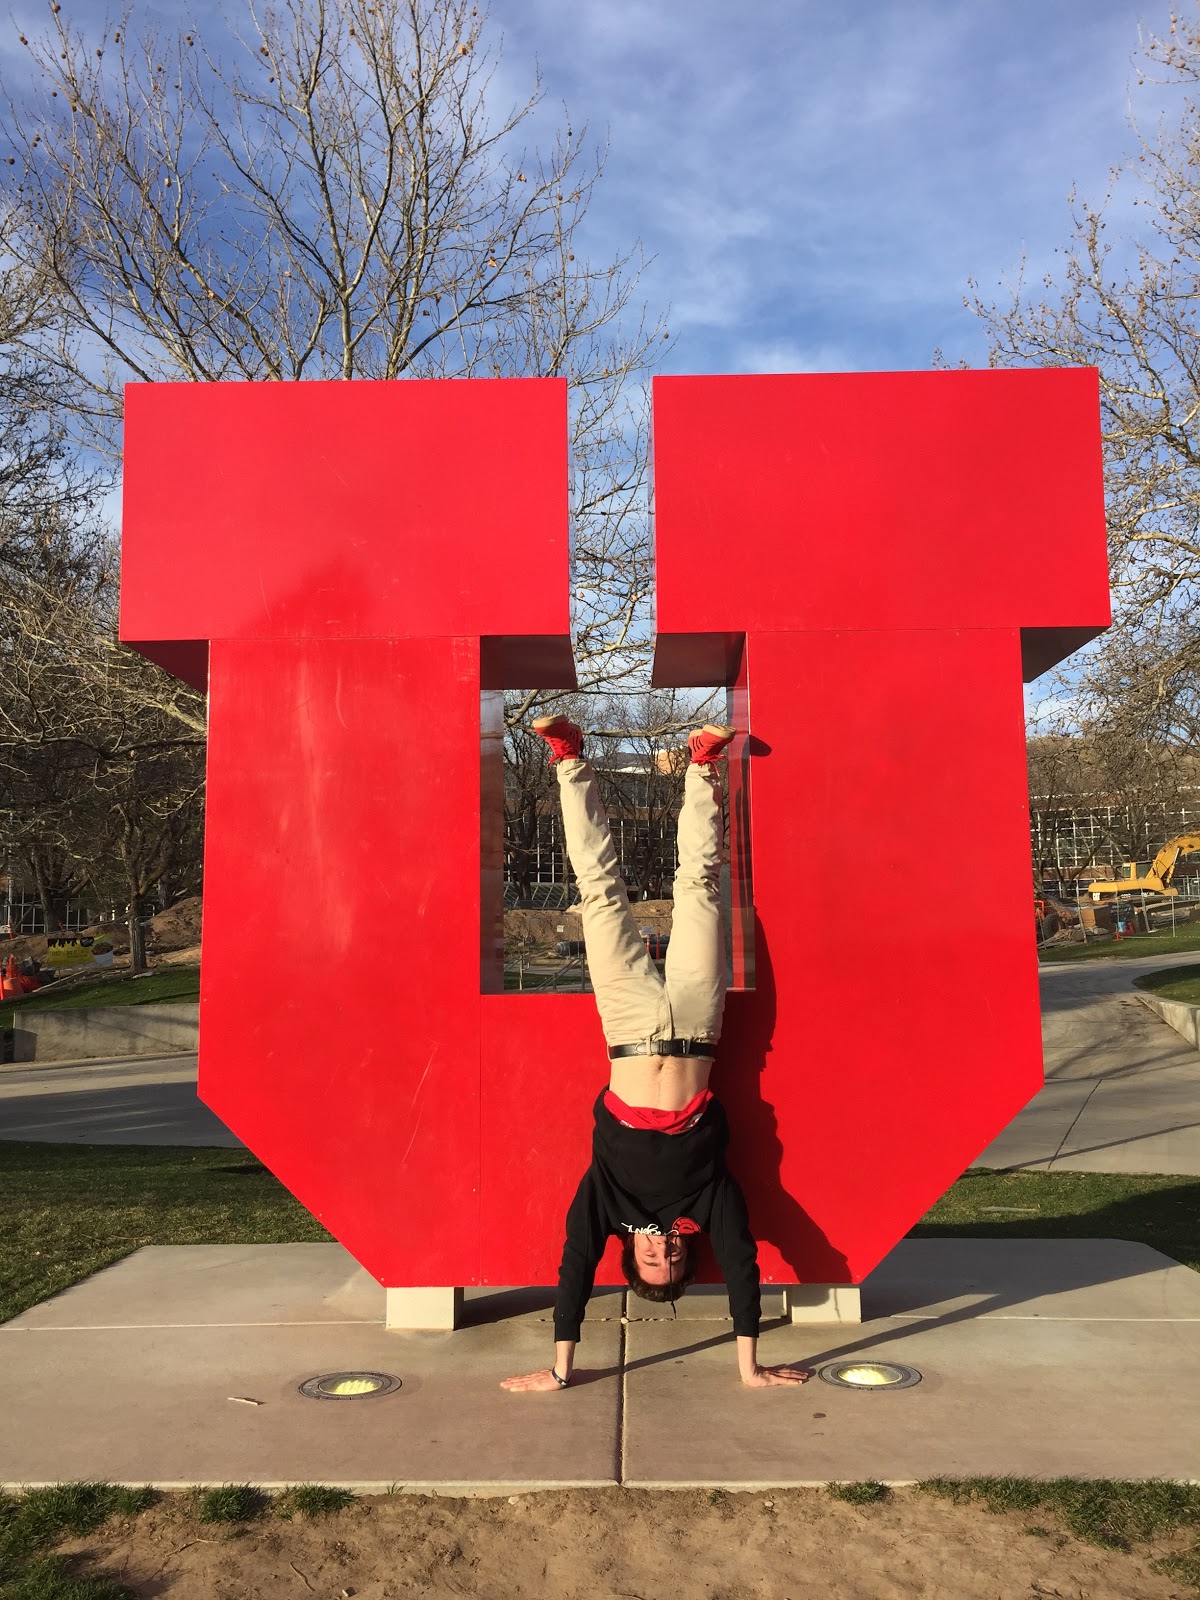 Upside Down at tOSU